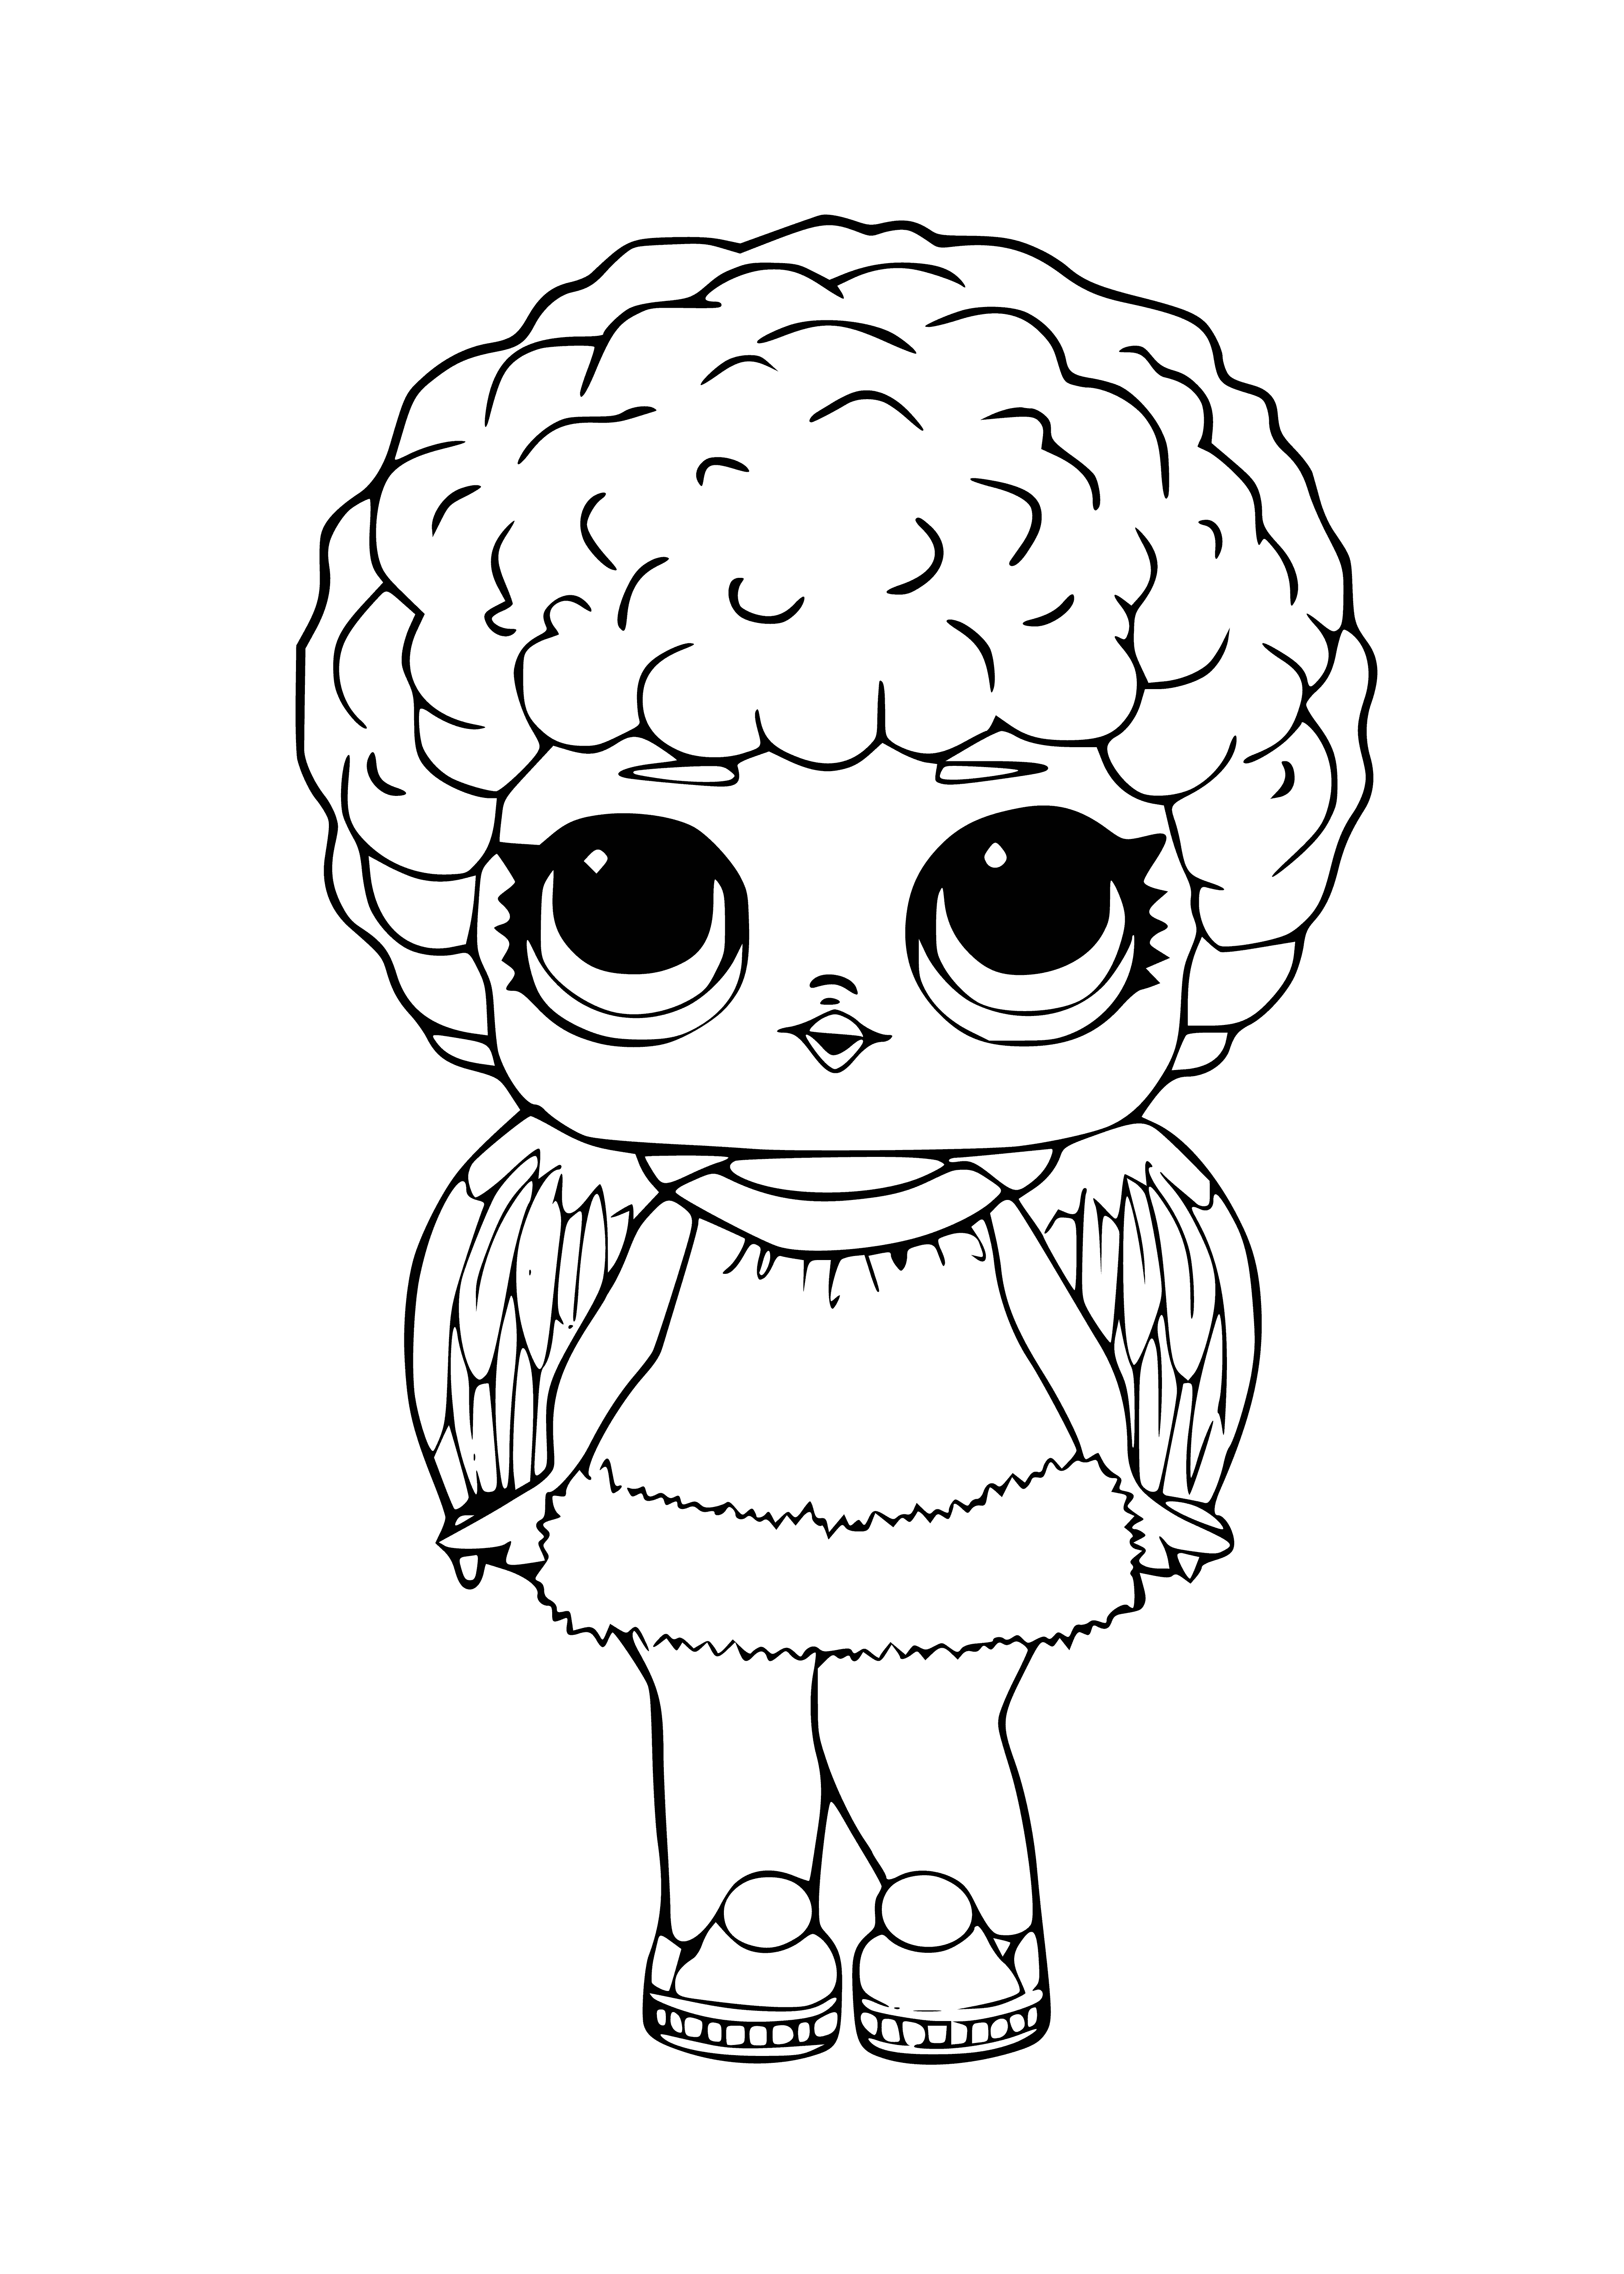 coloring page: Small, blue creature w/ large black eyes, thin arms & legs, wearing white & green garment, looks bashful & shy.